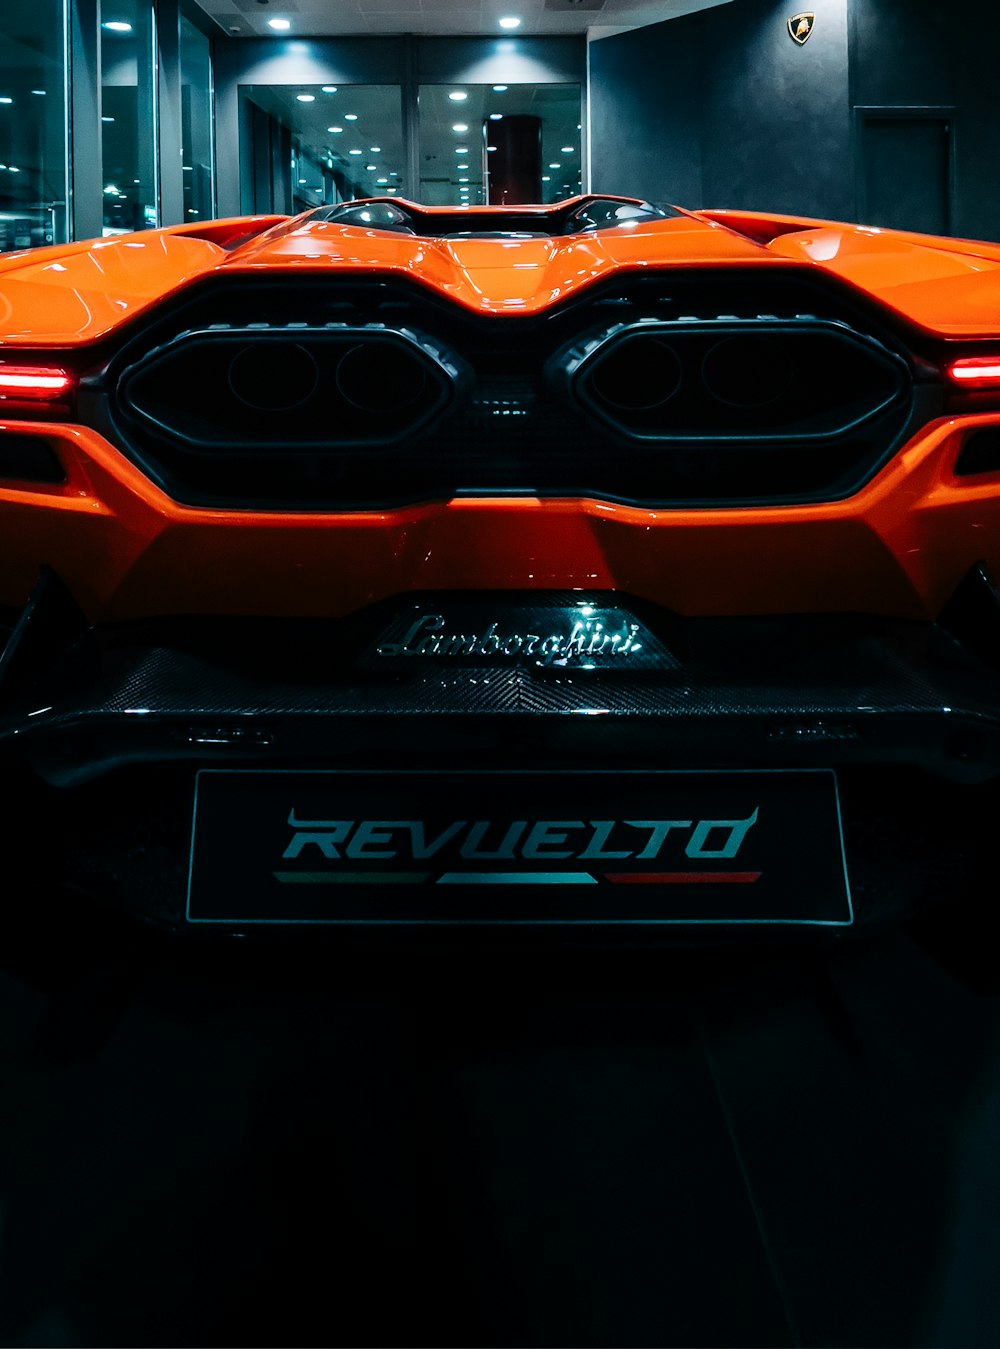 the front of an orange sports car in a dark room